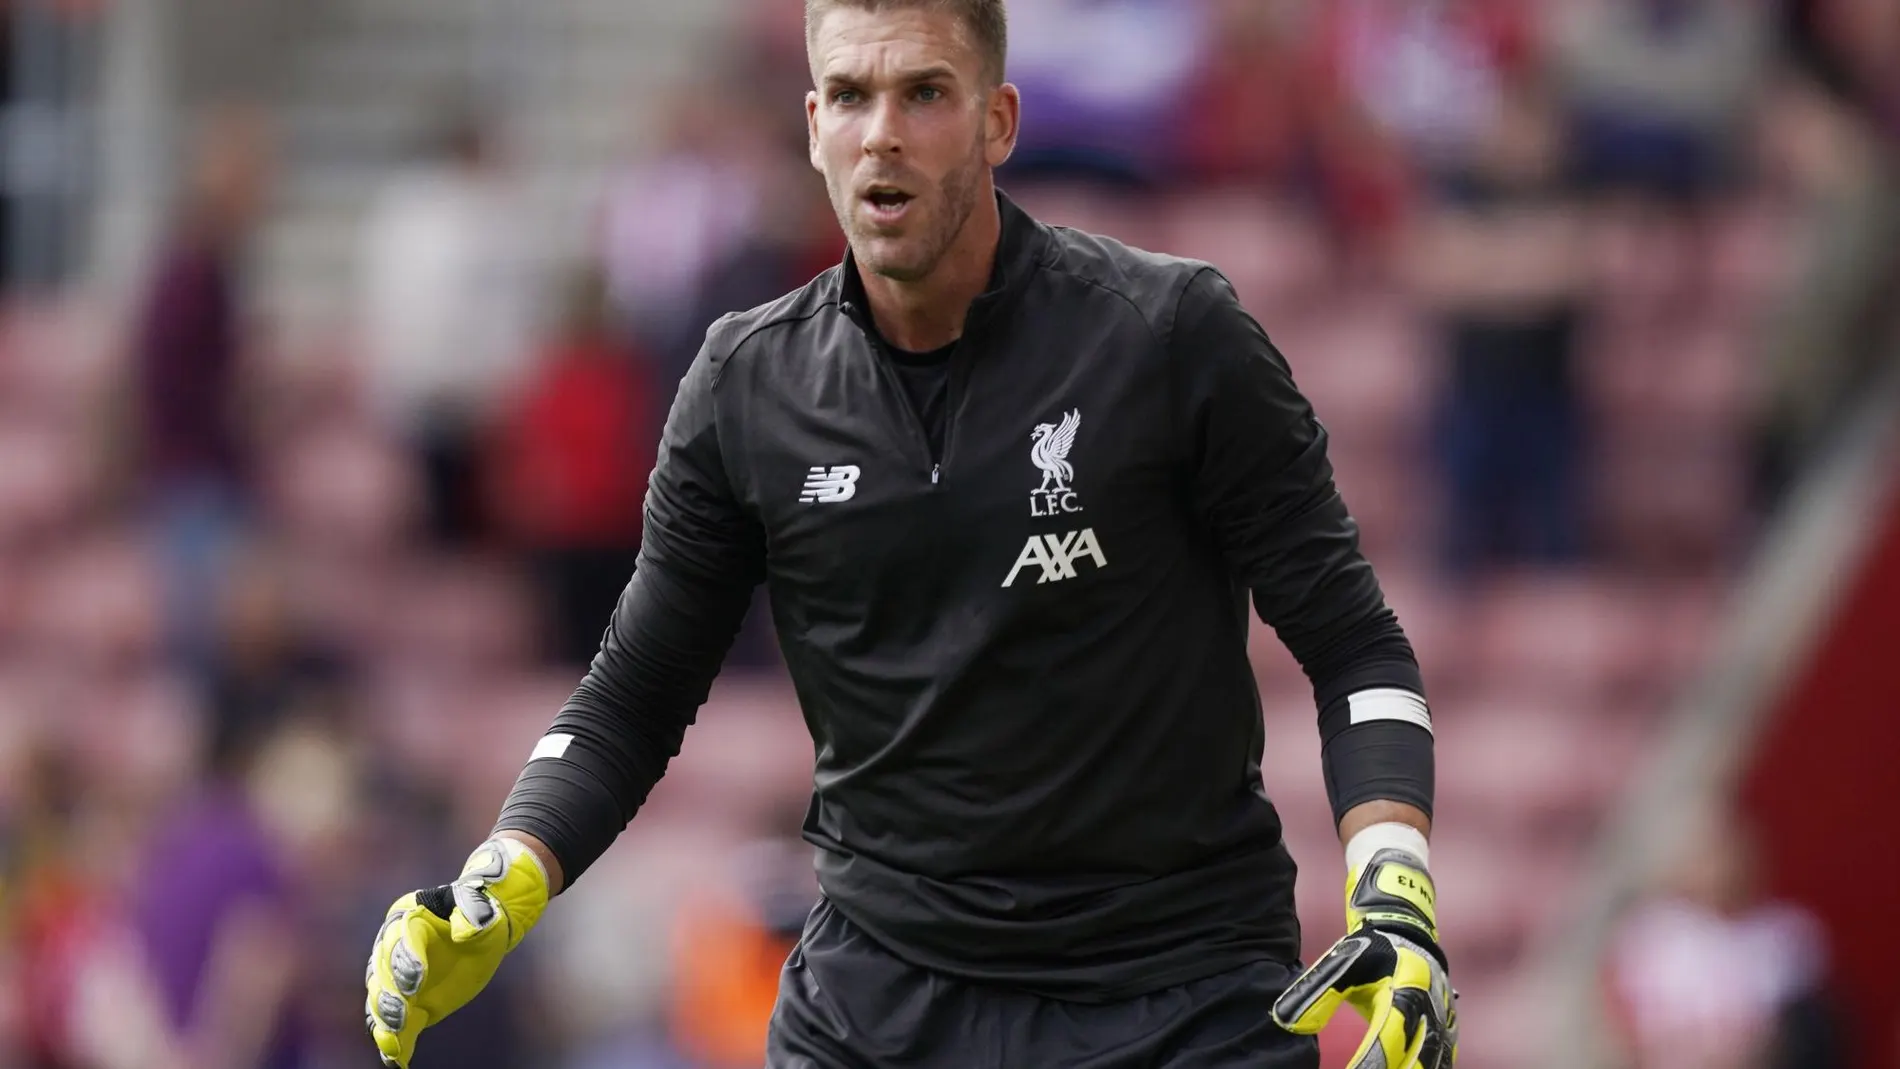 [Southampton (United Kingdom), 17/08/2019.- Liverpool's goalkeeper Adrian warms up ahead][of the English Premier League soccer match between Southampton and Liverpool at St Mary's Stadium, Southampton]